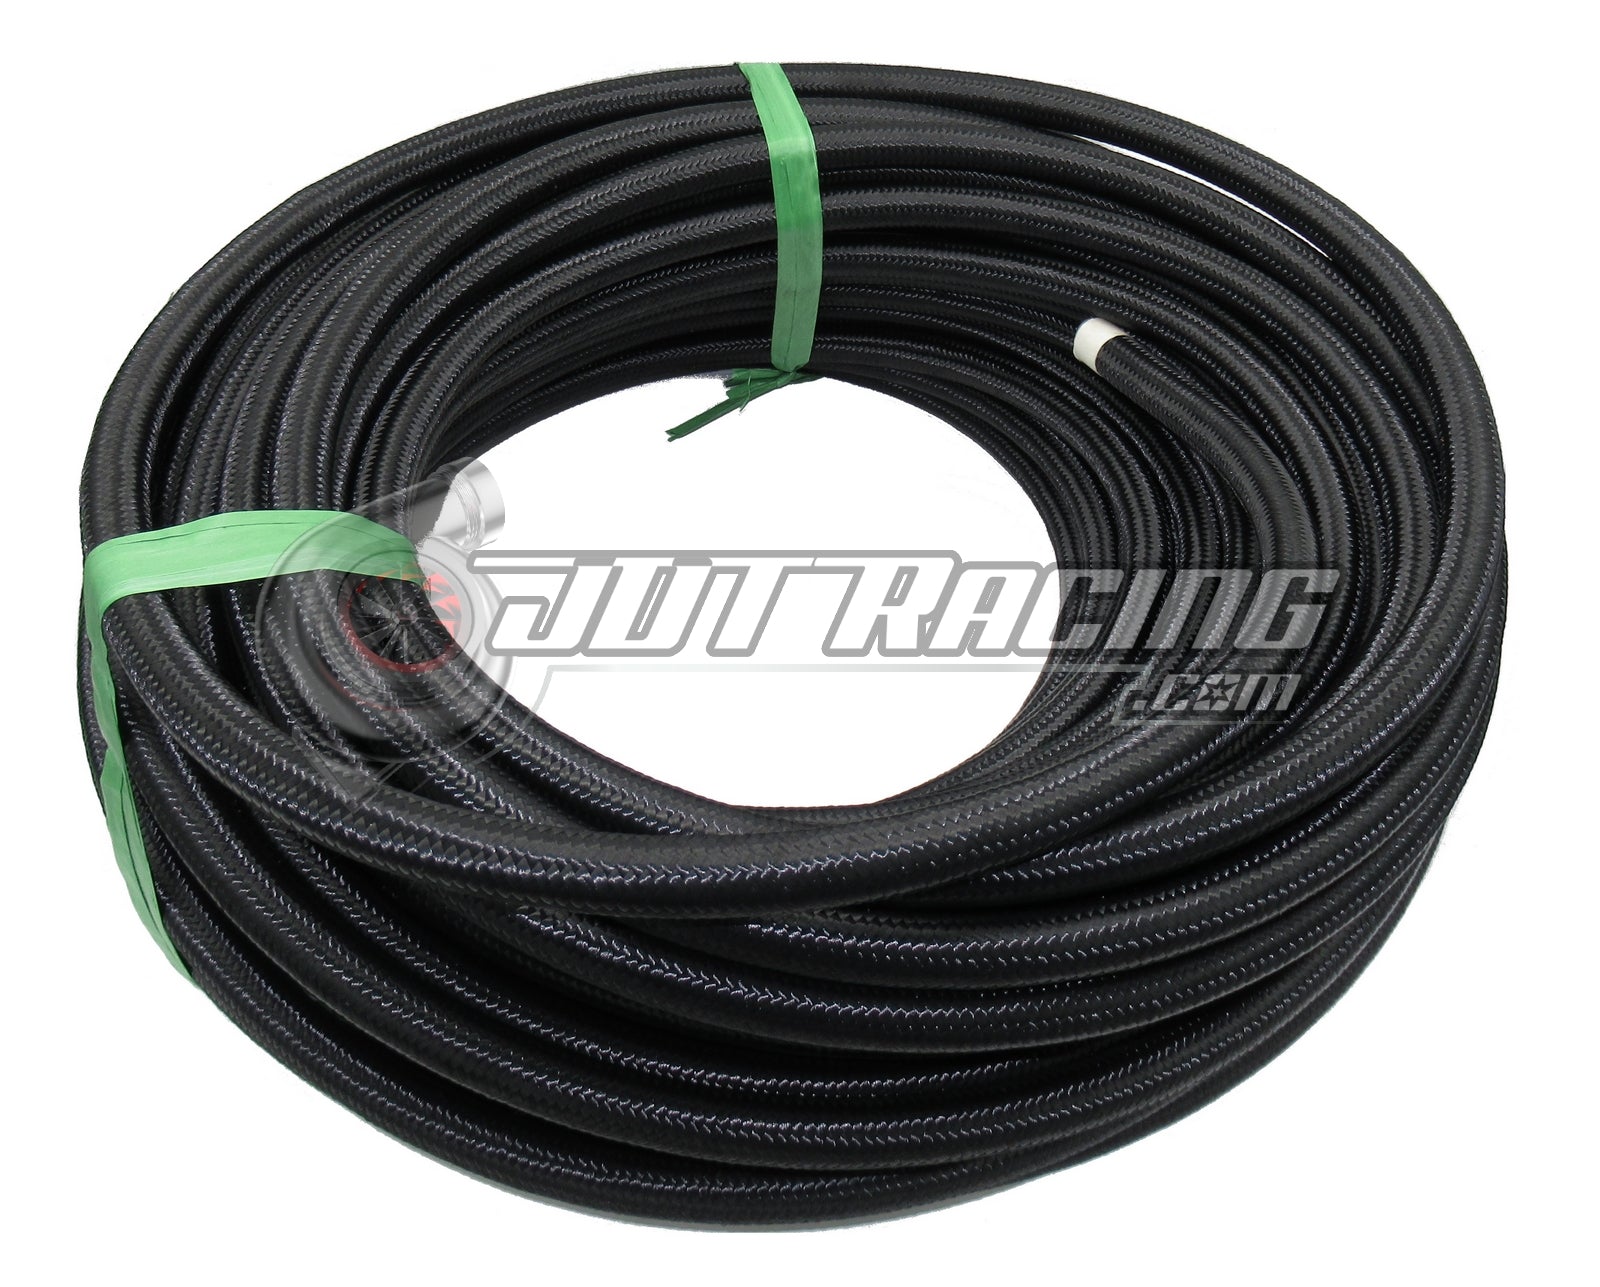 10AN AN10 Black Nylon Braided Stainless Steel PTFE Fuel Hose E85 15ft